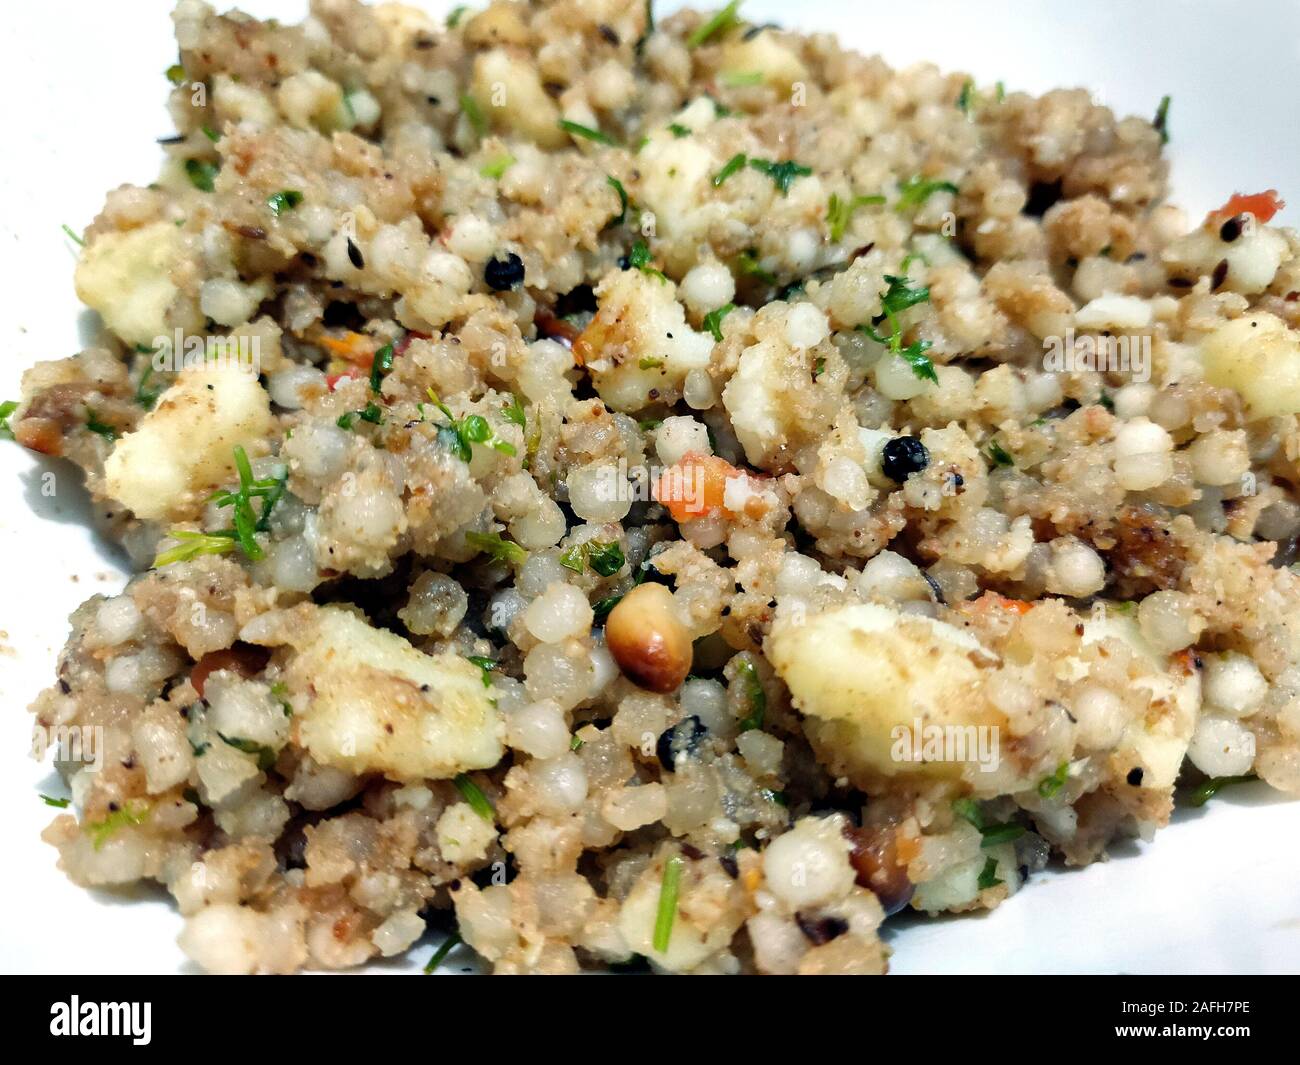 Indian dish made out of Sago called Sabudana khichdi, Usually eaten during fasting days, Stock Photo